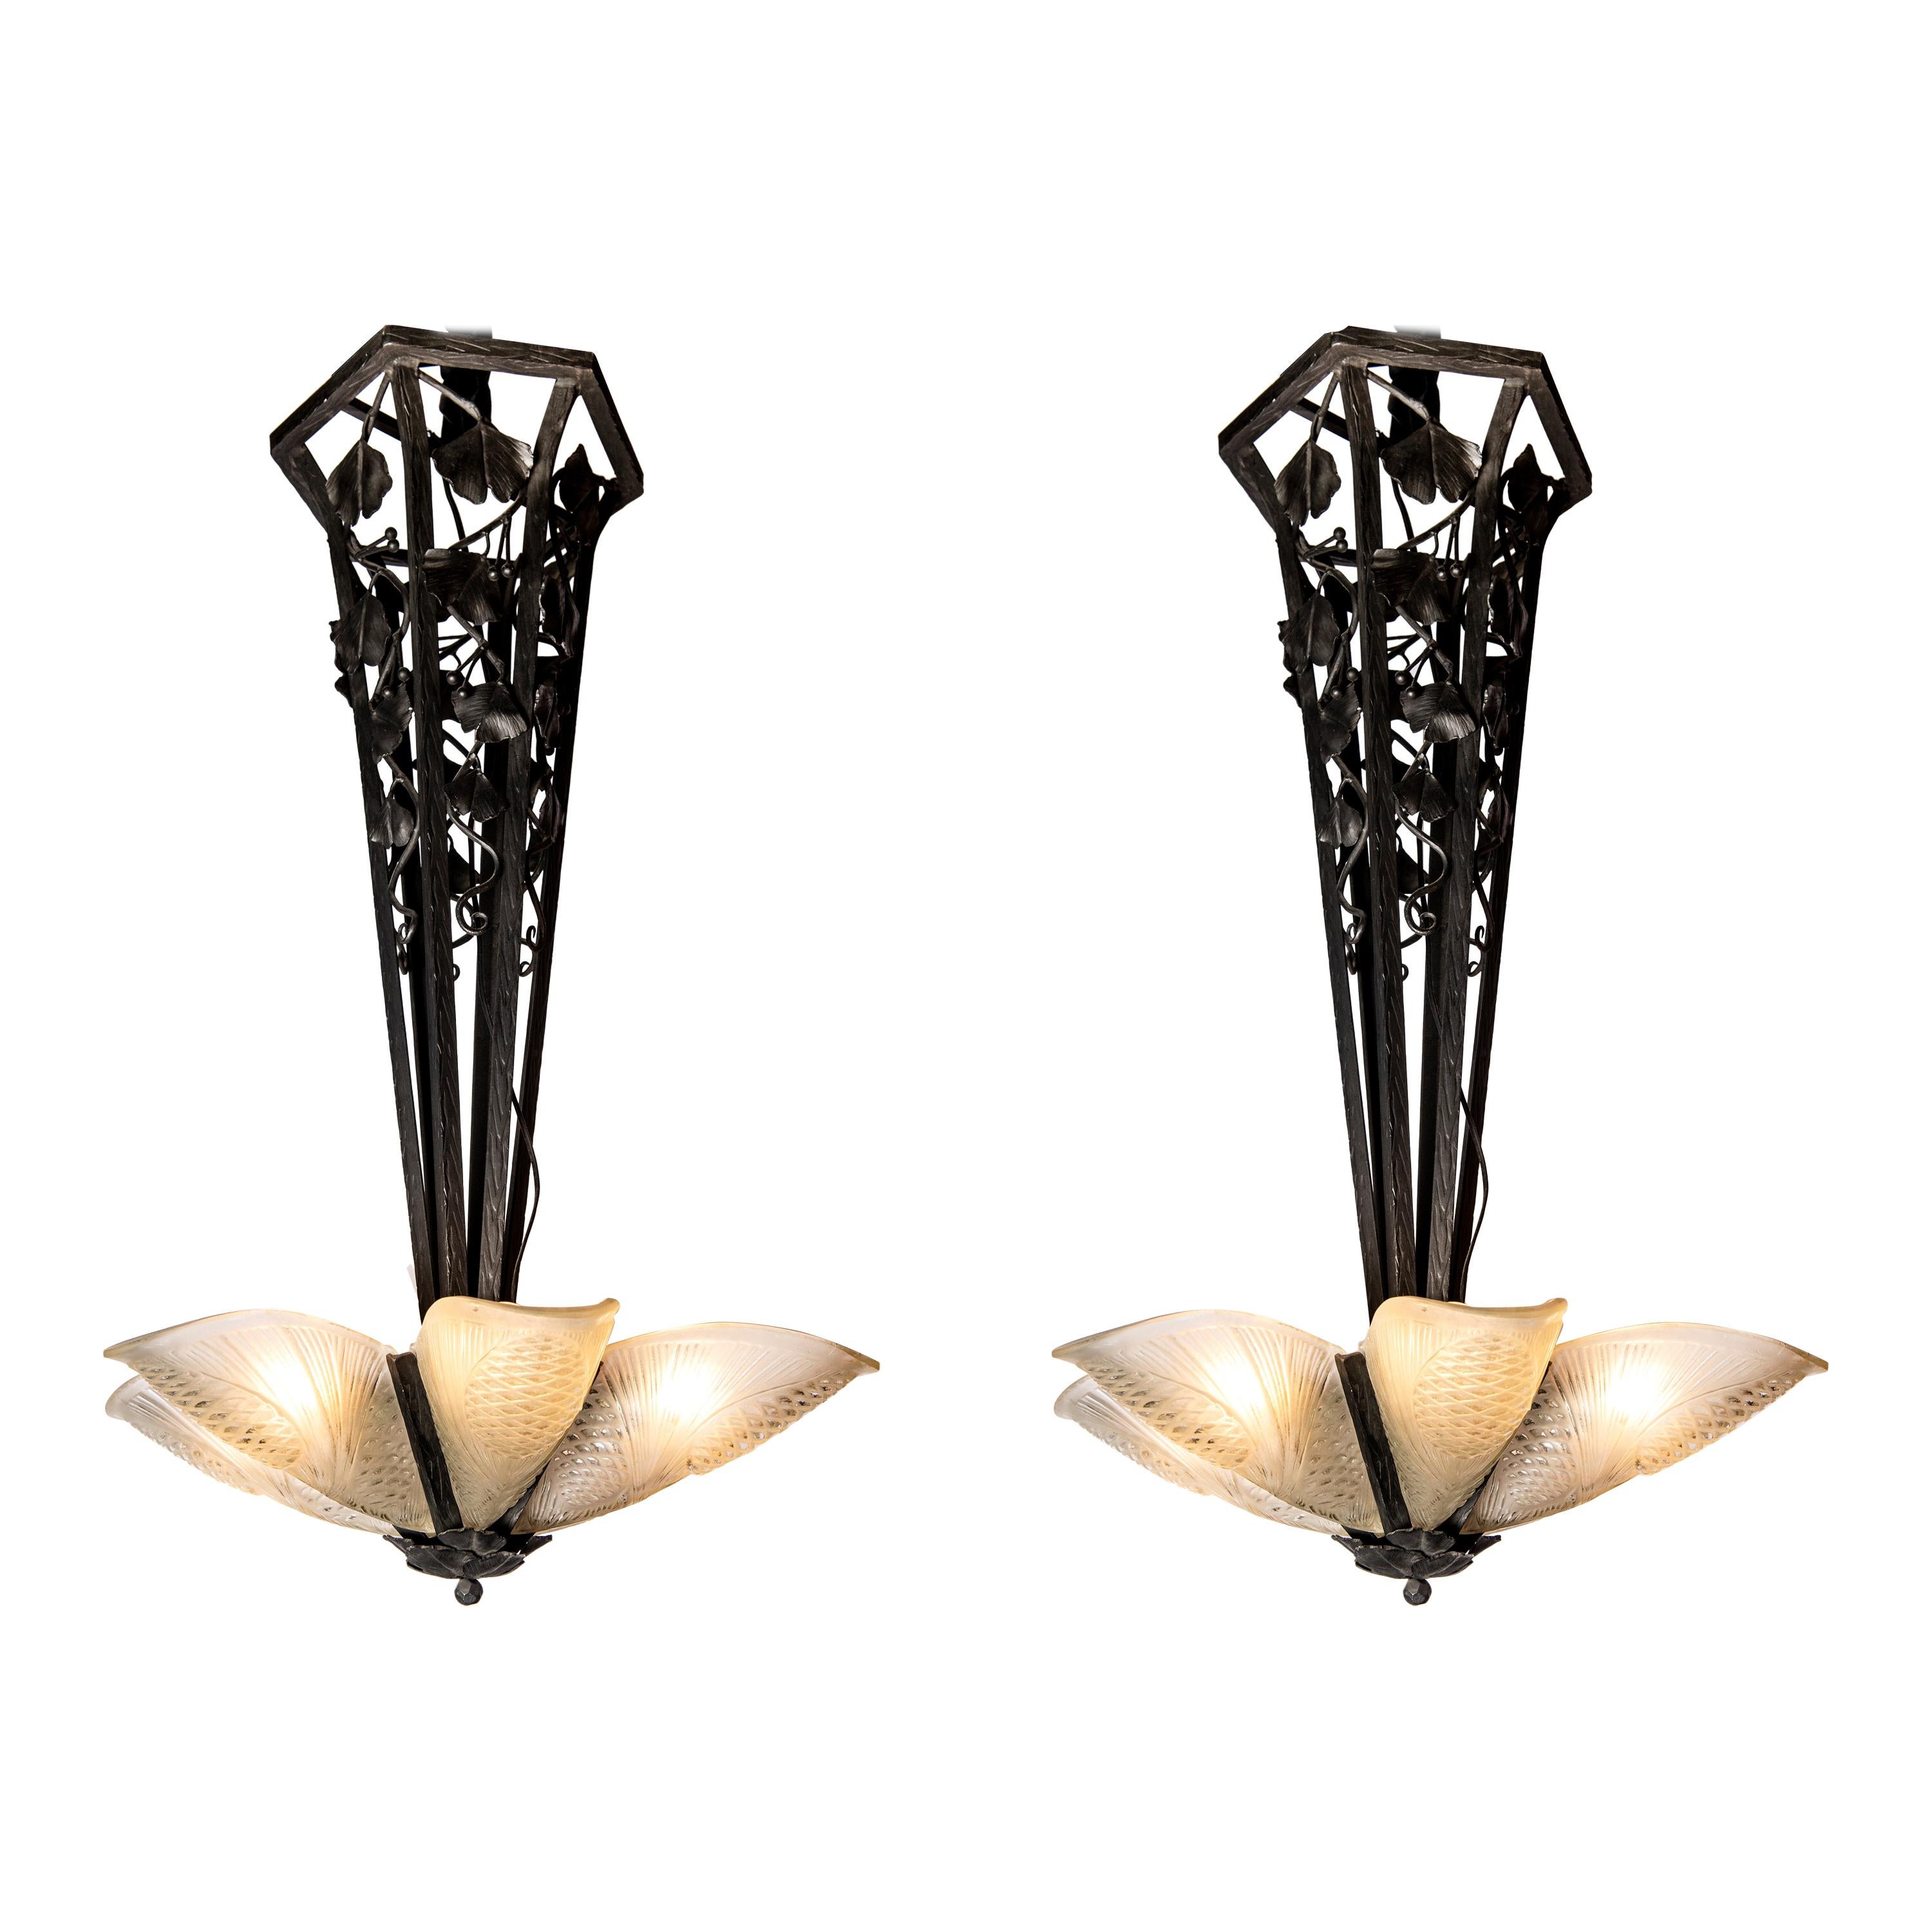 Pair of Wrought Iron and Savino Glass Chandelier, France, circa 1930